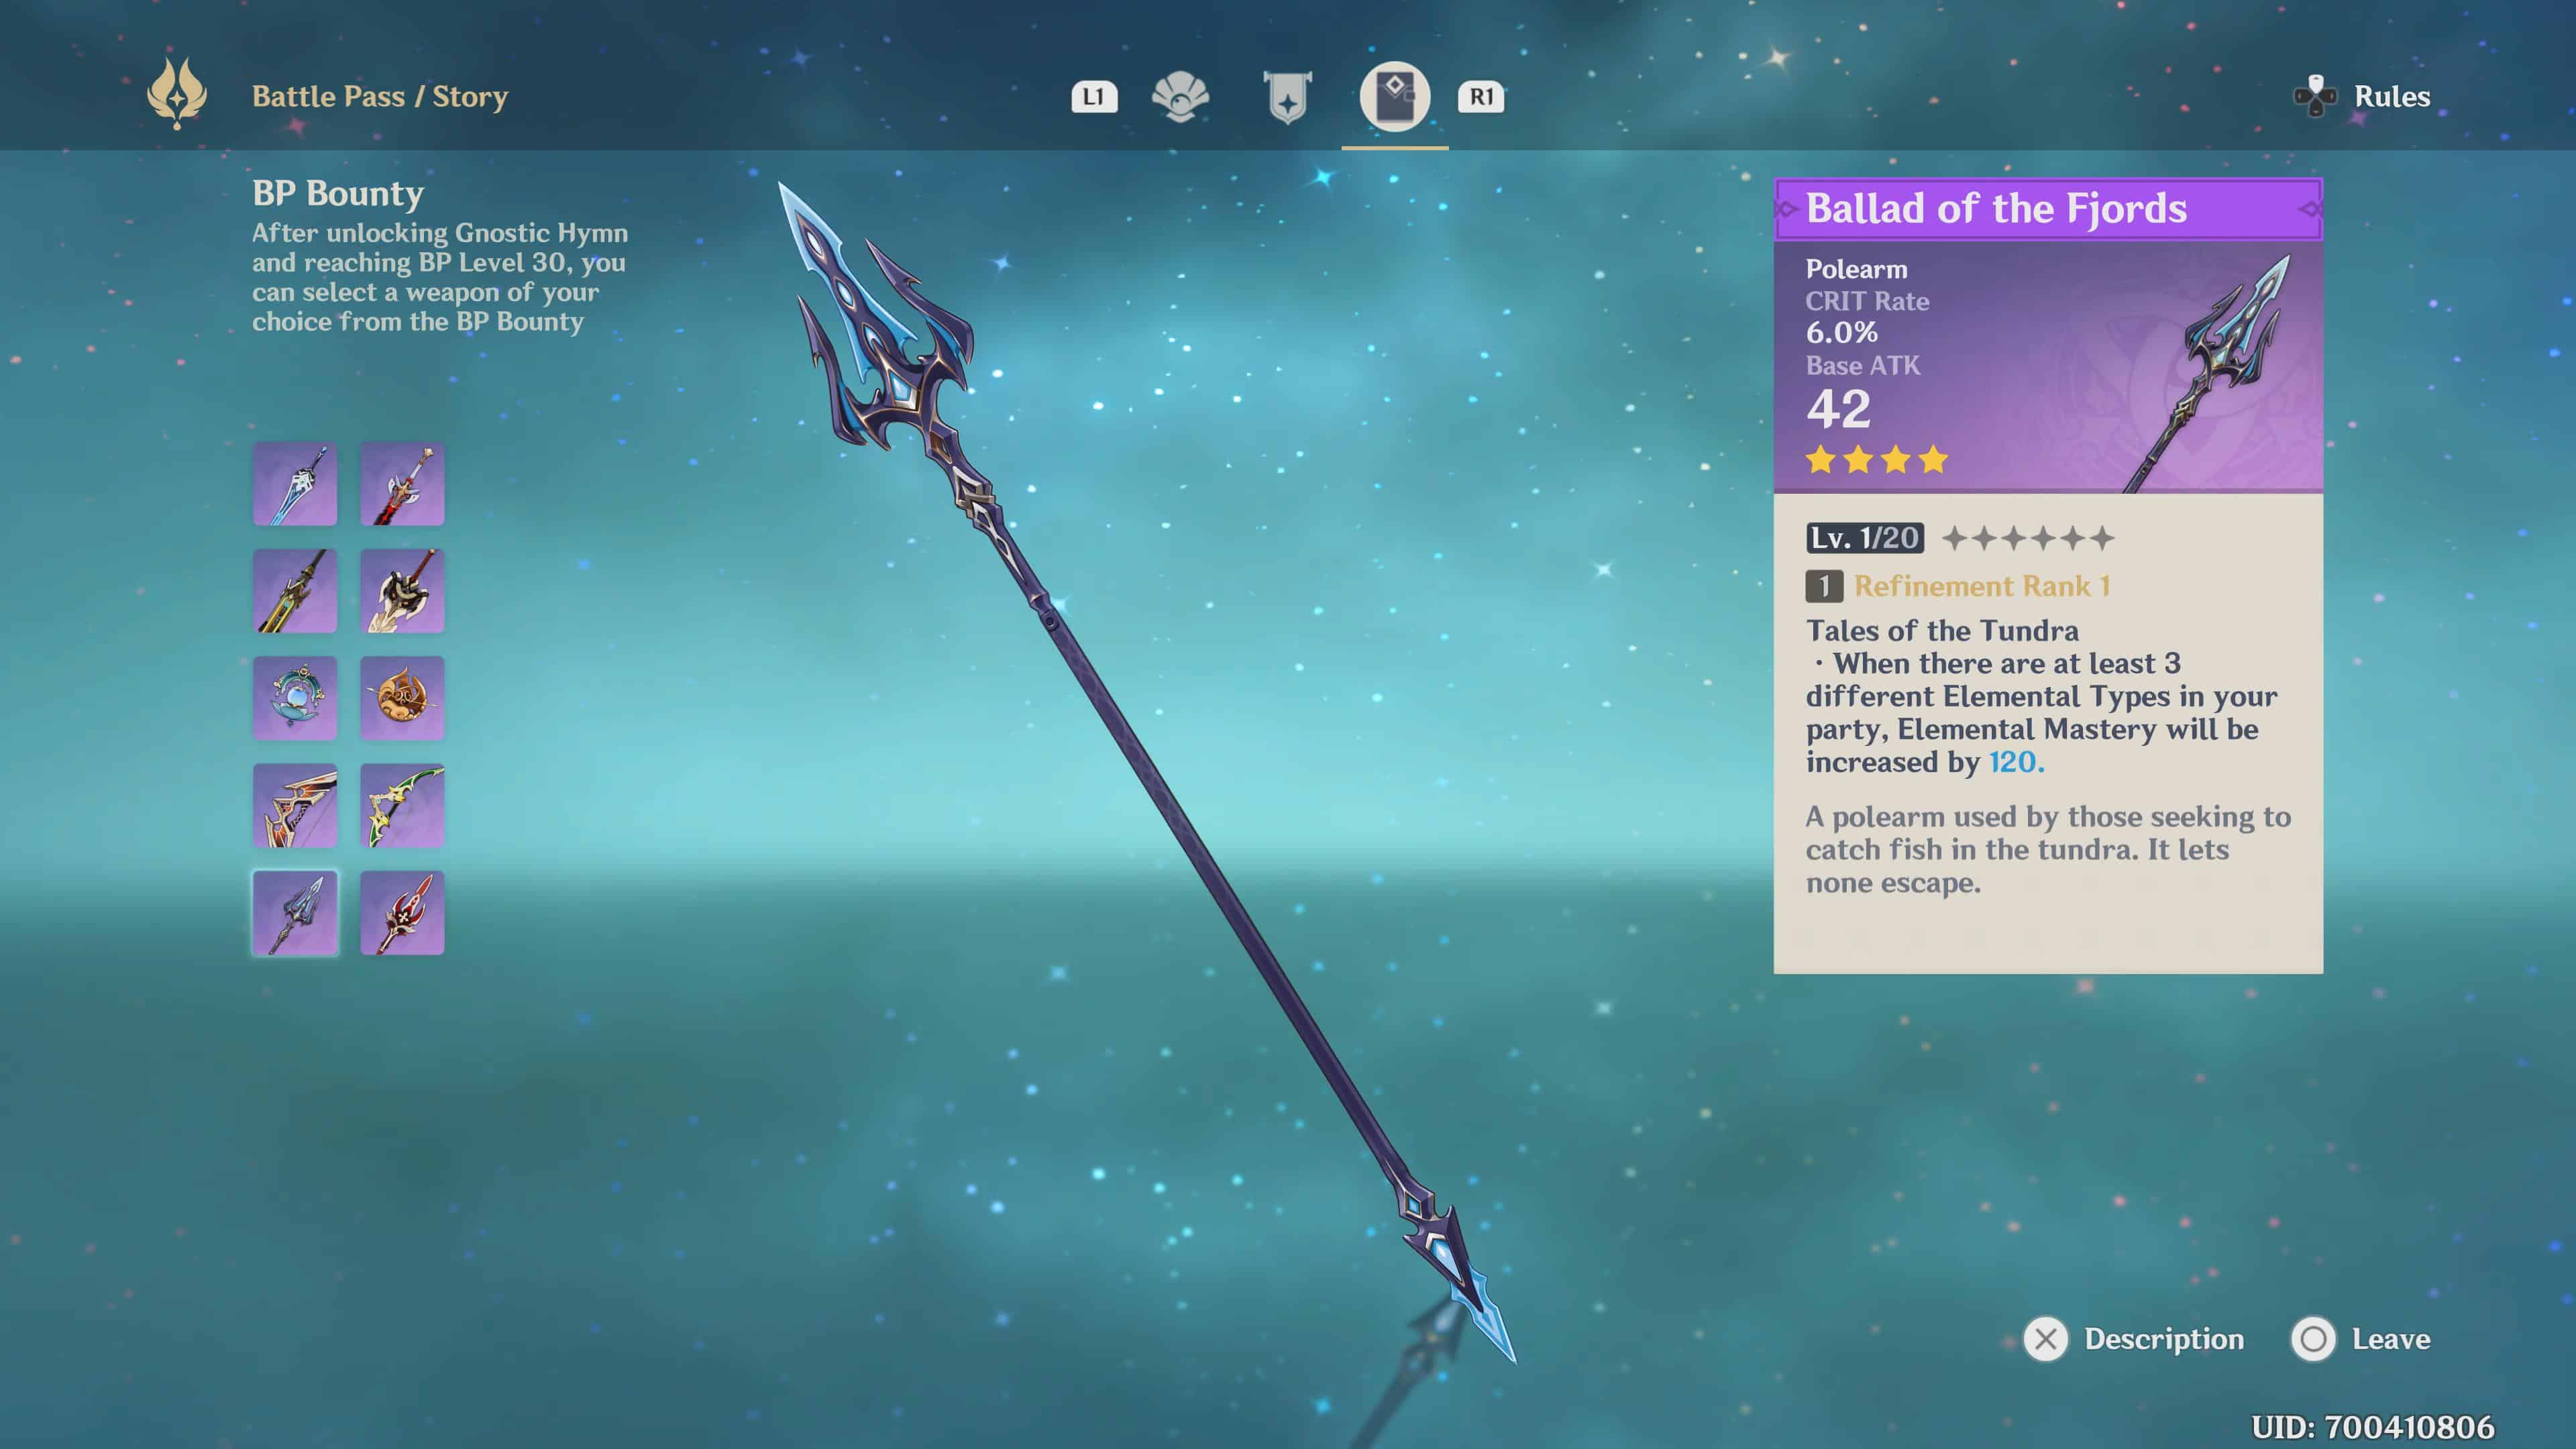 A screenshot of the best battle pass weapons - Ballad of Fjords in Genshin Impact.